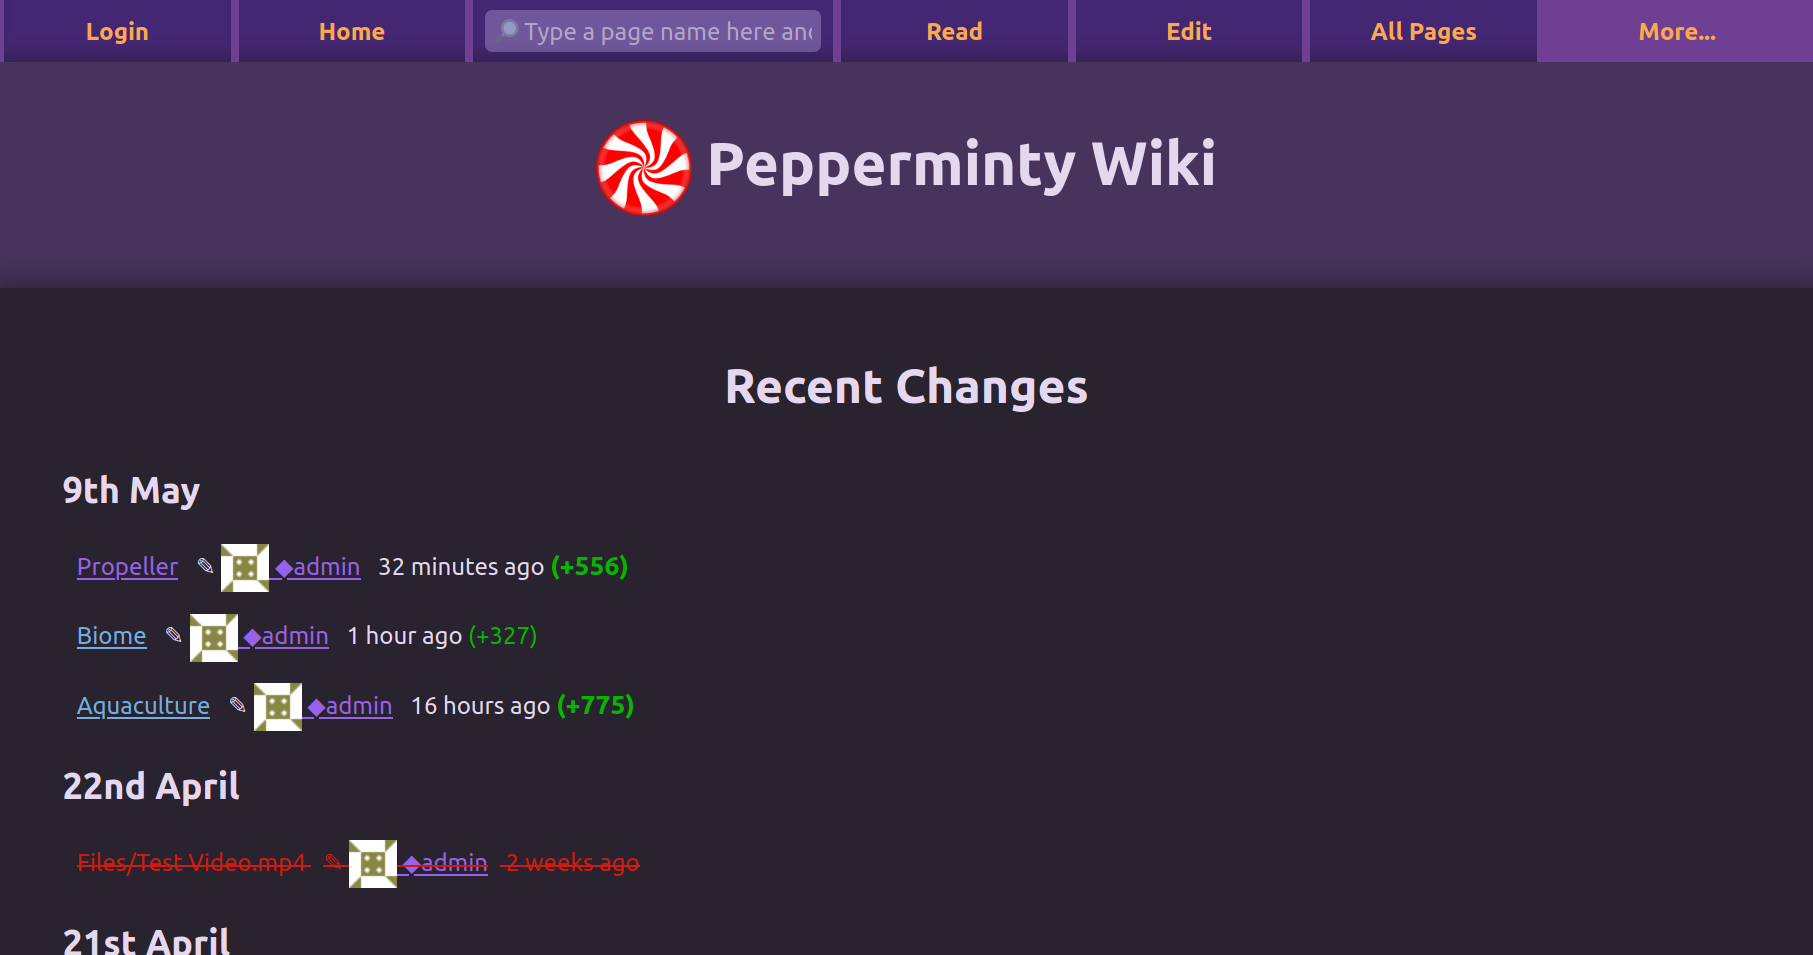 Screenshot showing the recent changes page